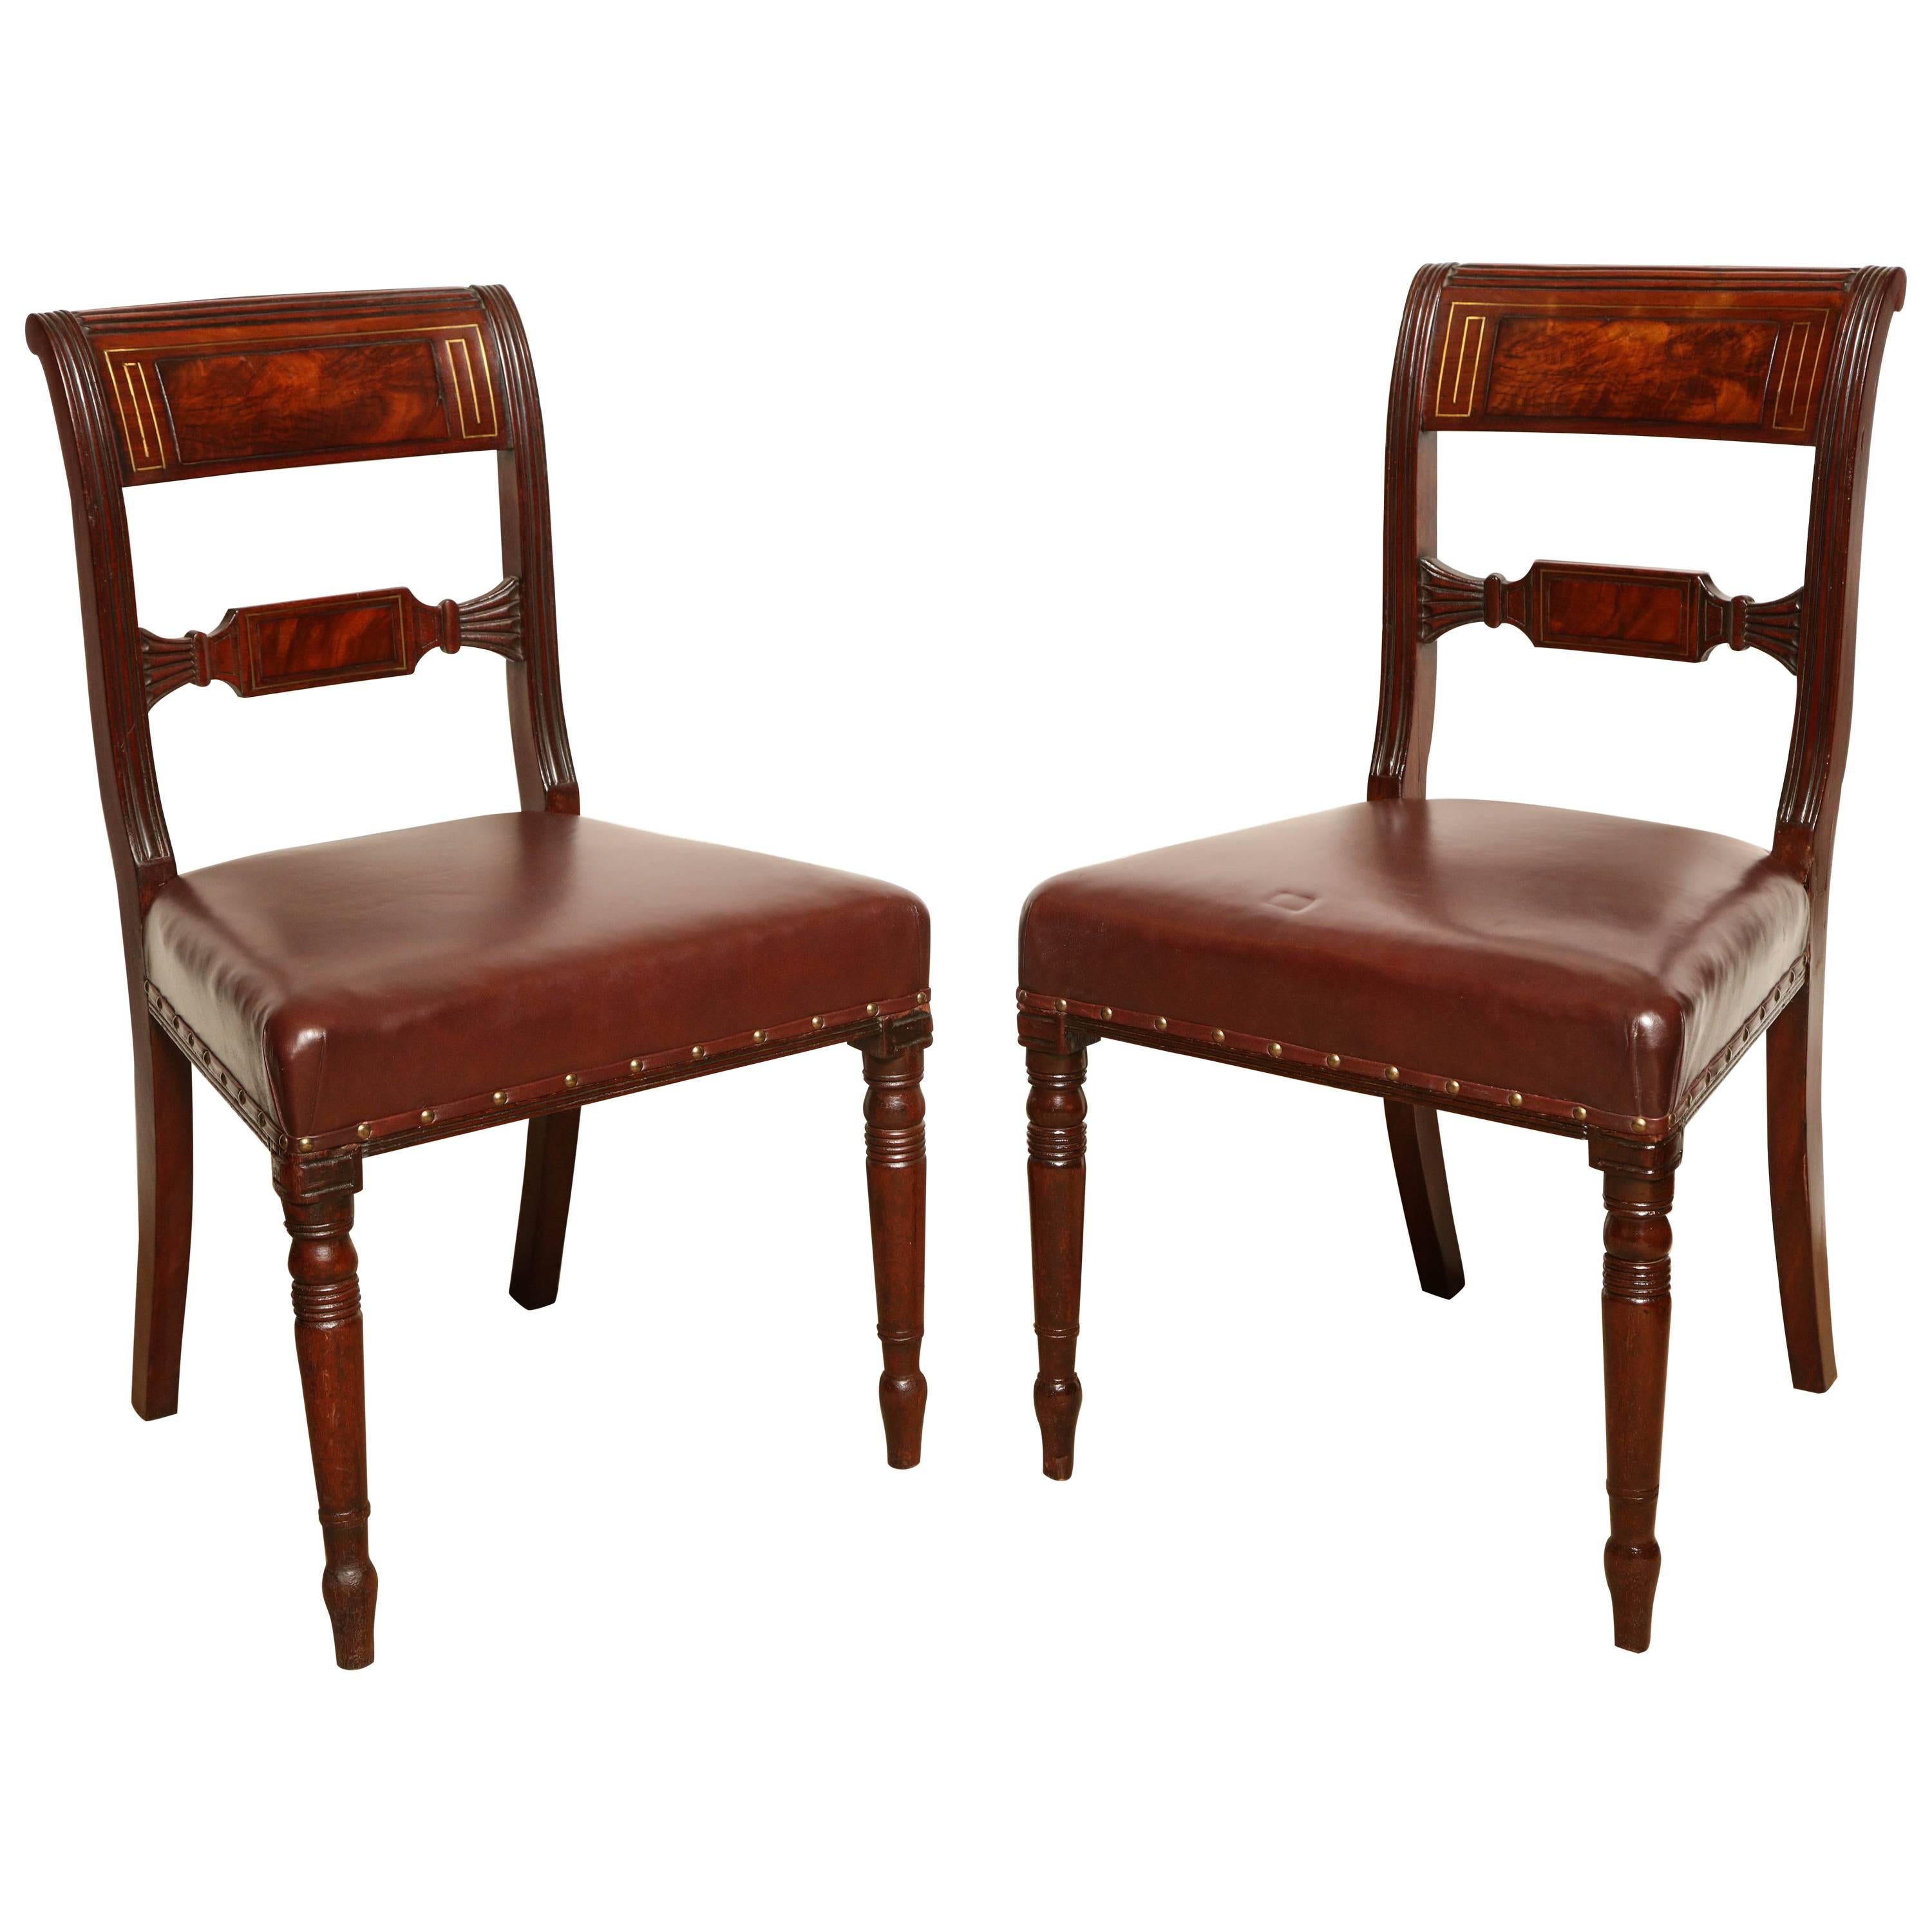 Pair of Early 19th Century English Regency Side Chairs